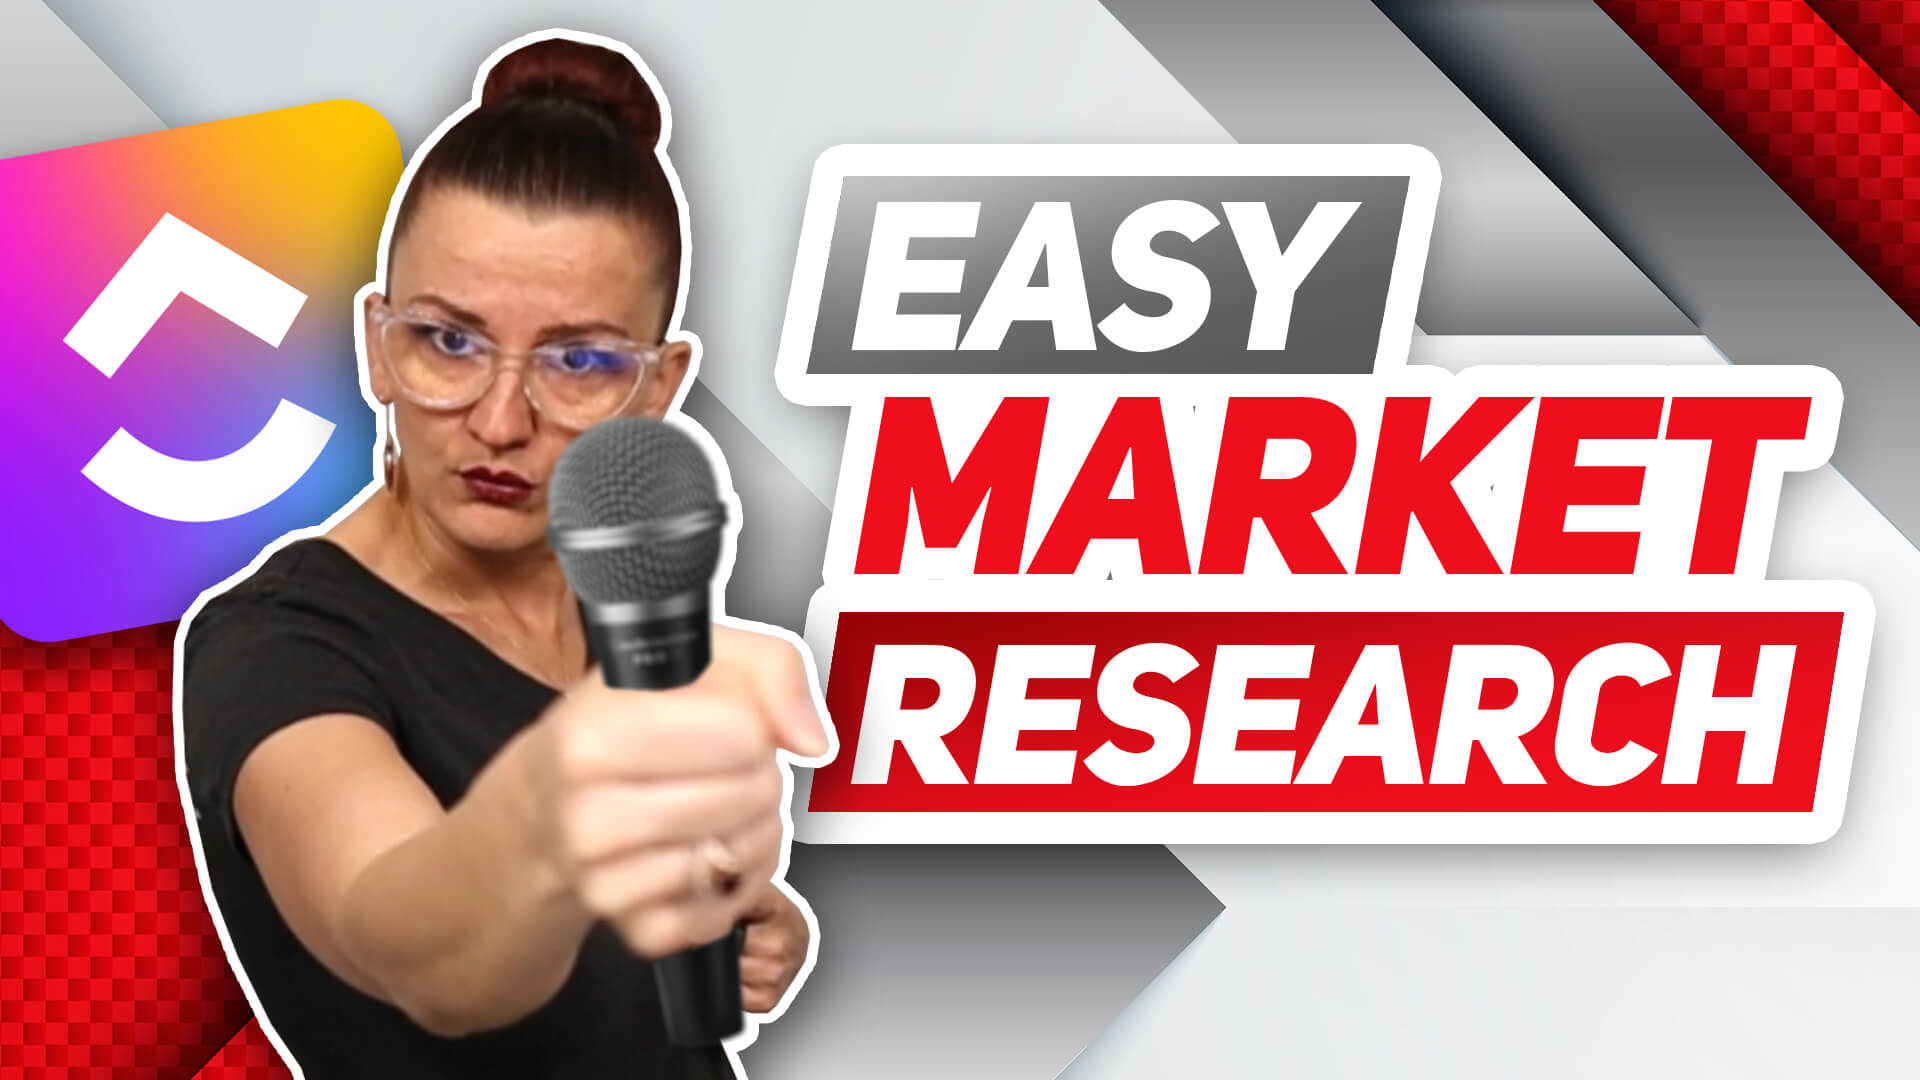 Conduct market research study using ClickUp - Yvi pointing a mic in your face